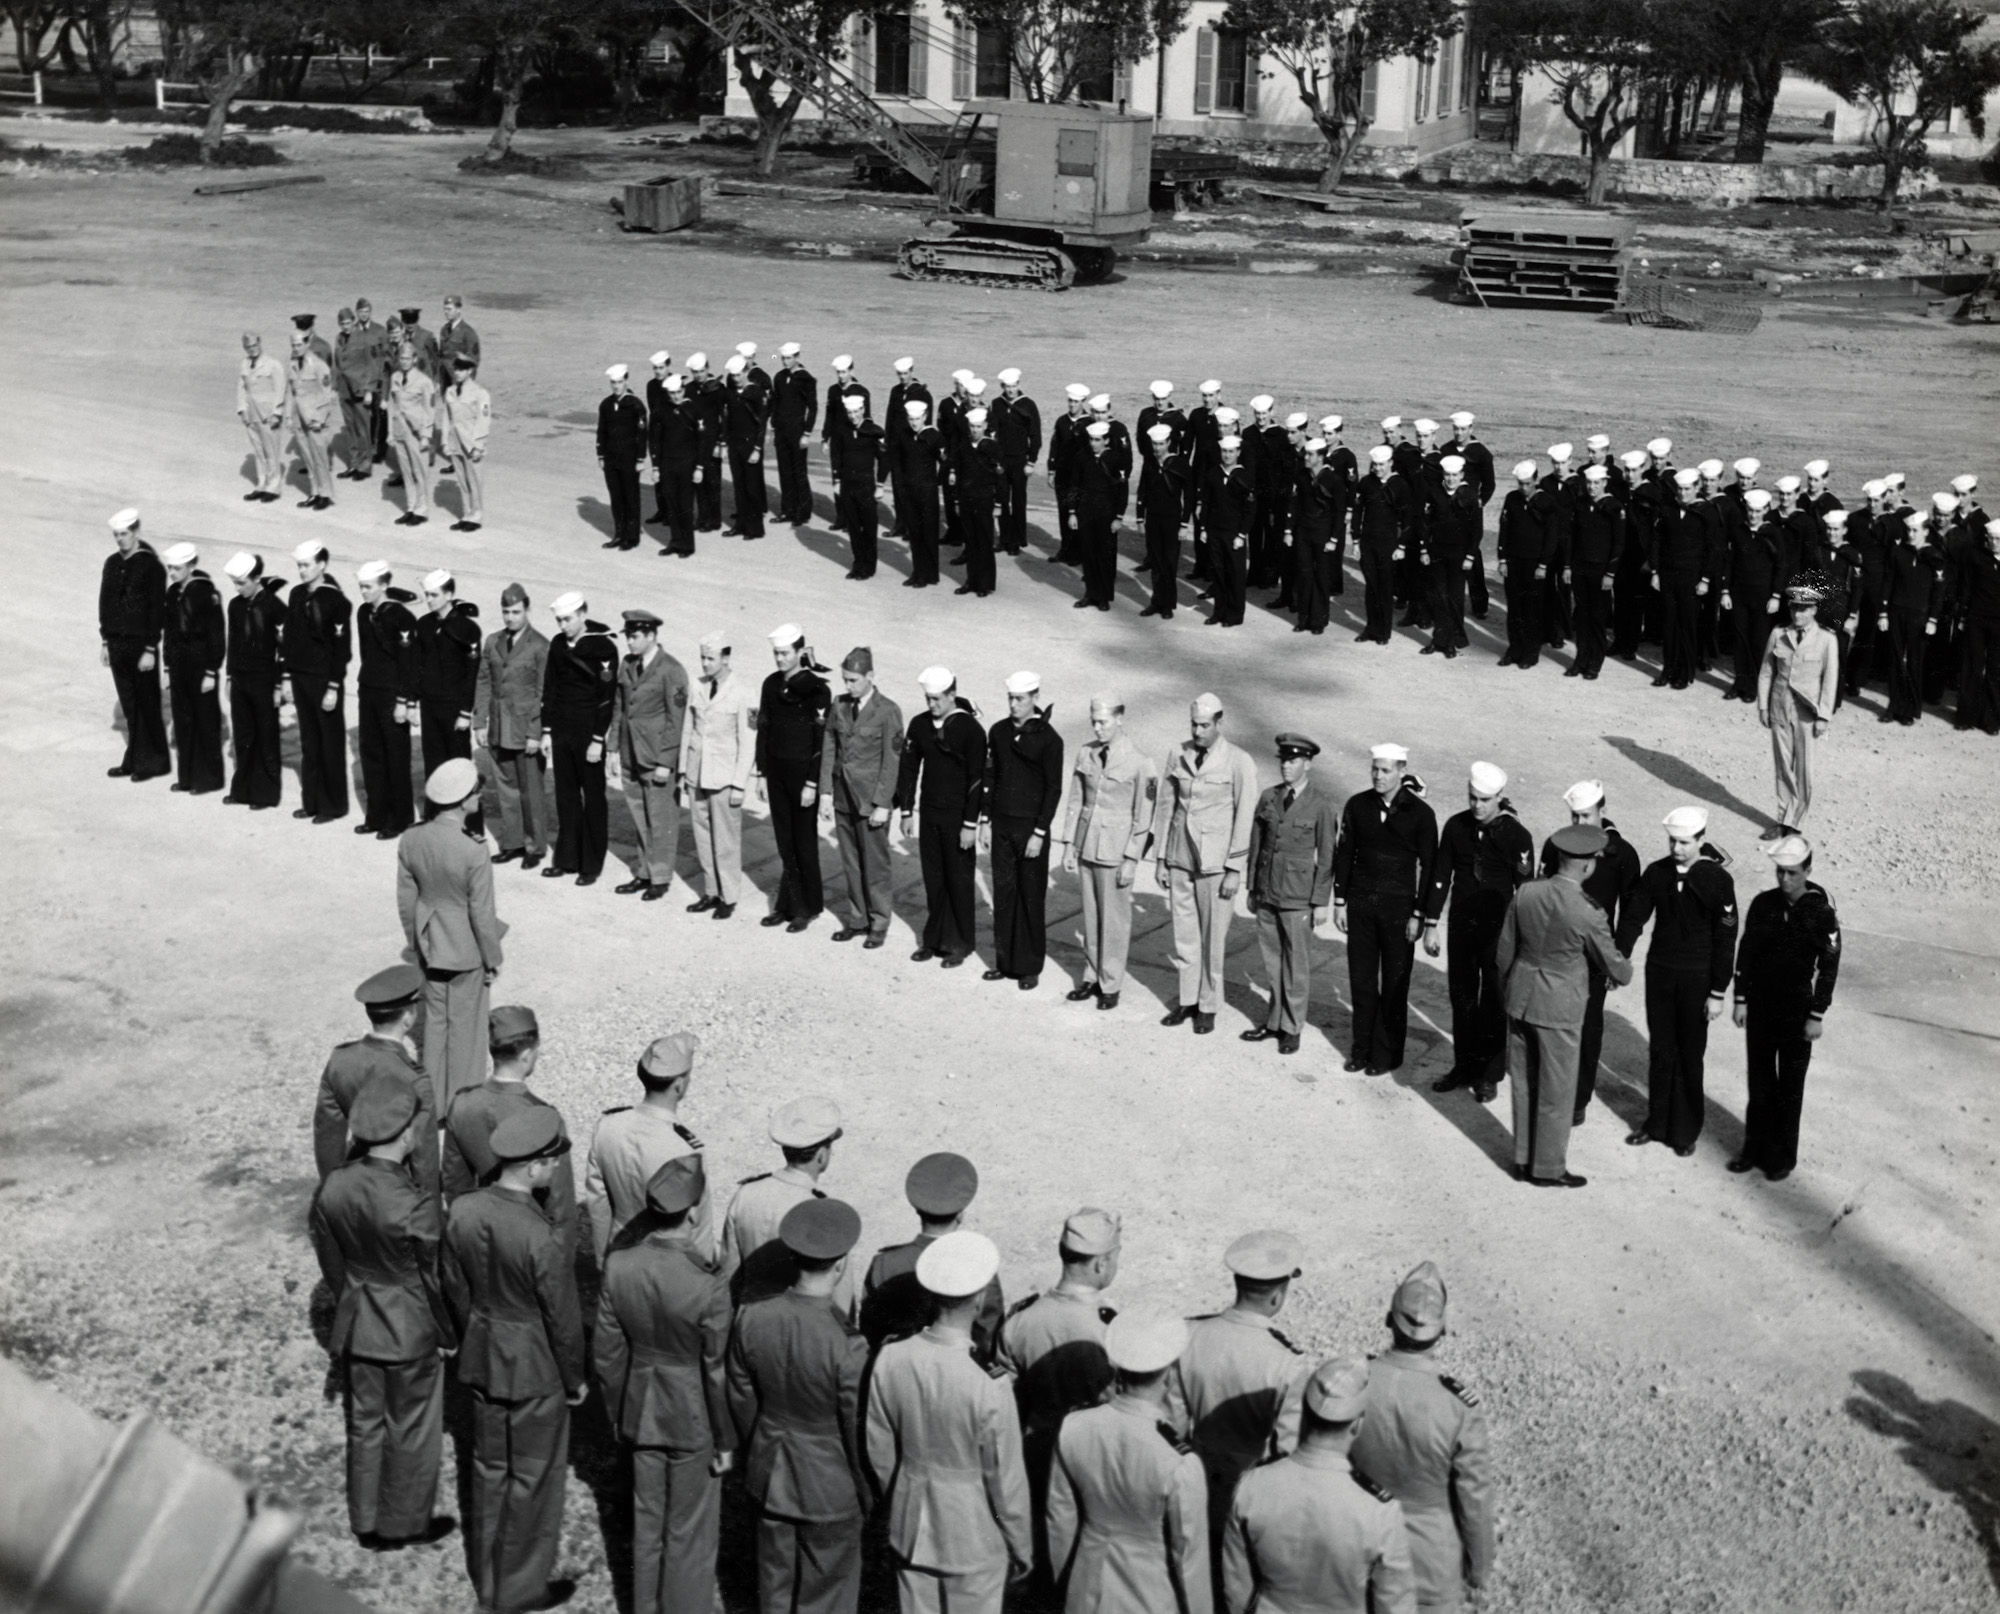 In this photograph Admiral H. Kent Hewitt of the 8th Fleet can be seen giving out awards to the heroes from the USS Duane. Admiral Hewitt was previously aboard the Duane where he and Admiral Lowry took part in “Operation Anvil-Dragoon” – the Allied invasion of Southern France. The USS Hewitt was later named after him and was in service from 1974 until 2001.

The man receiving the award in this photograph is this website’s namesake – Ph. M. John “Jack” Baker. It is believed that this photograph was taken by Dale Rooks. I am not sure if there are photos of each man being awarded their medals, or if Rooks just happened to take this one because my grandfather was his good friend. This was likely taken in early 1945 while the USS Duane was docked in Bizerte, Tunisia.

If anyone has any more information, or can identify any of the other men in this photograph, please contact me.

This photograph comes from my grandfather John "Jack" Baker's Warbook, which contains over 150 original photographs. I have been scanning them all at 1200dpi and submitting them here for Shorpy readers. View full size.